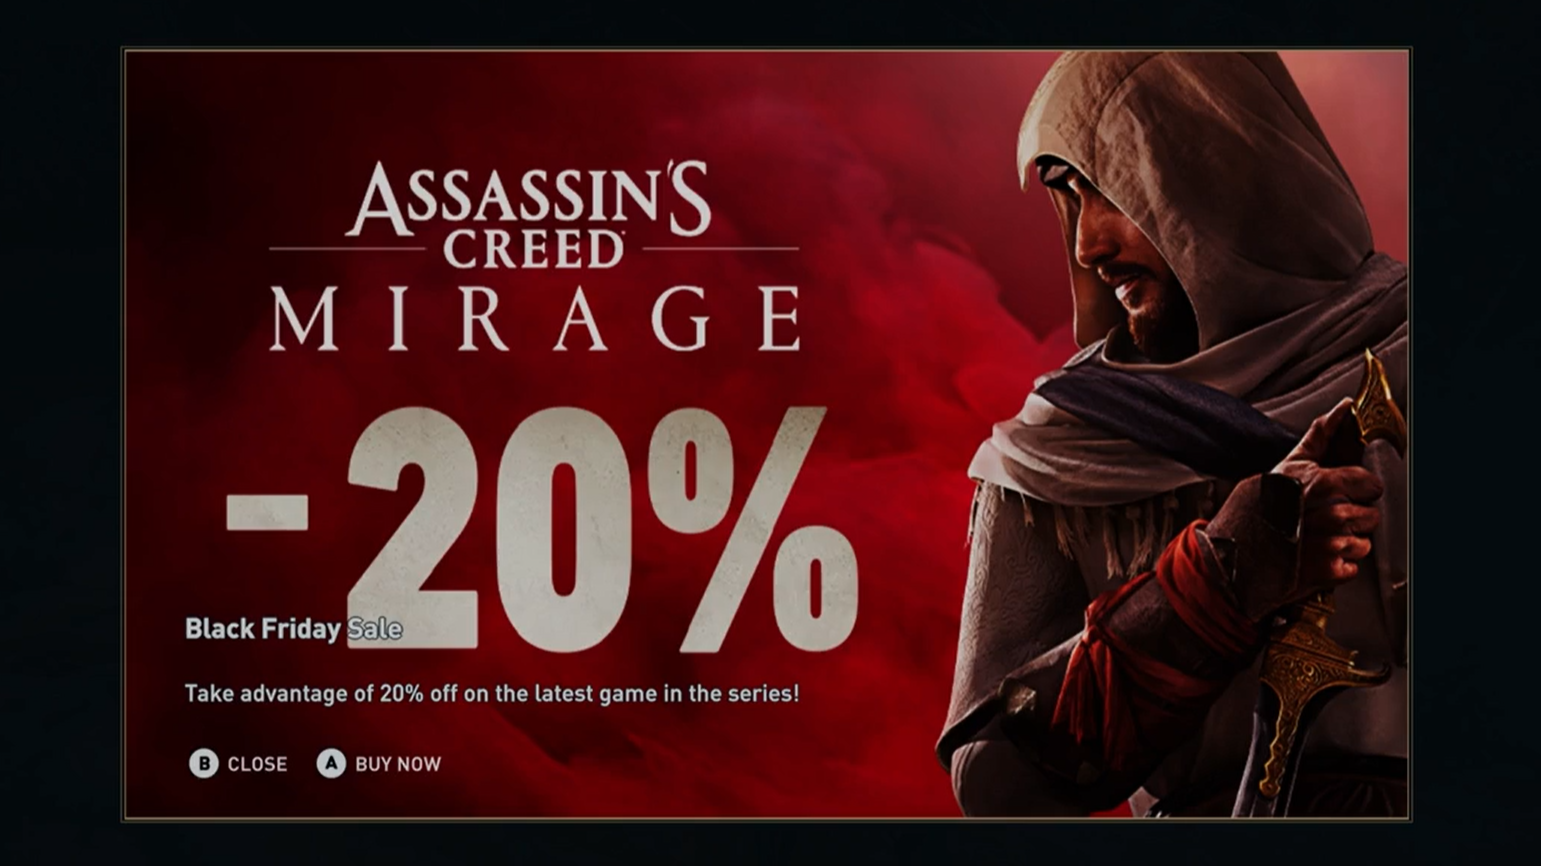 Assasin's Creed Mirage Adverts in Assassins Creed